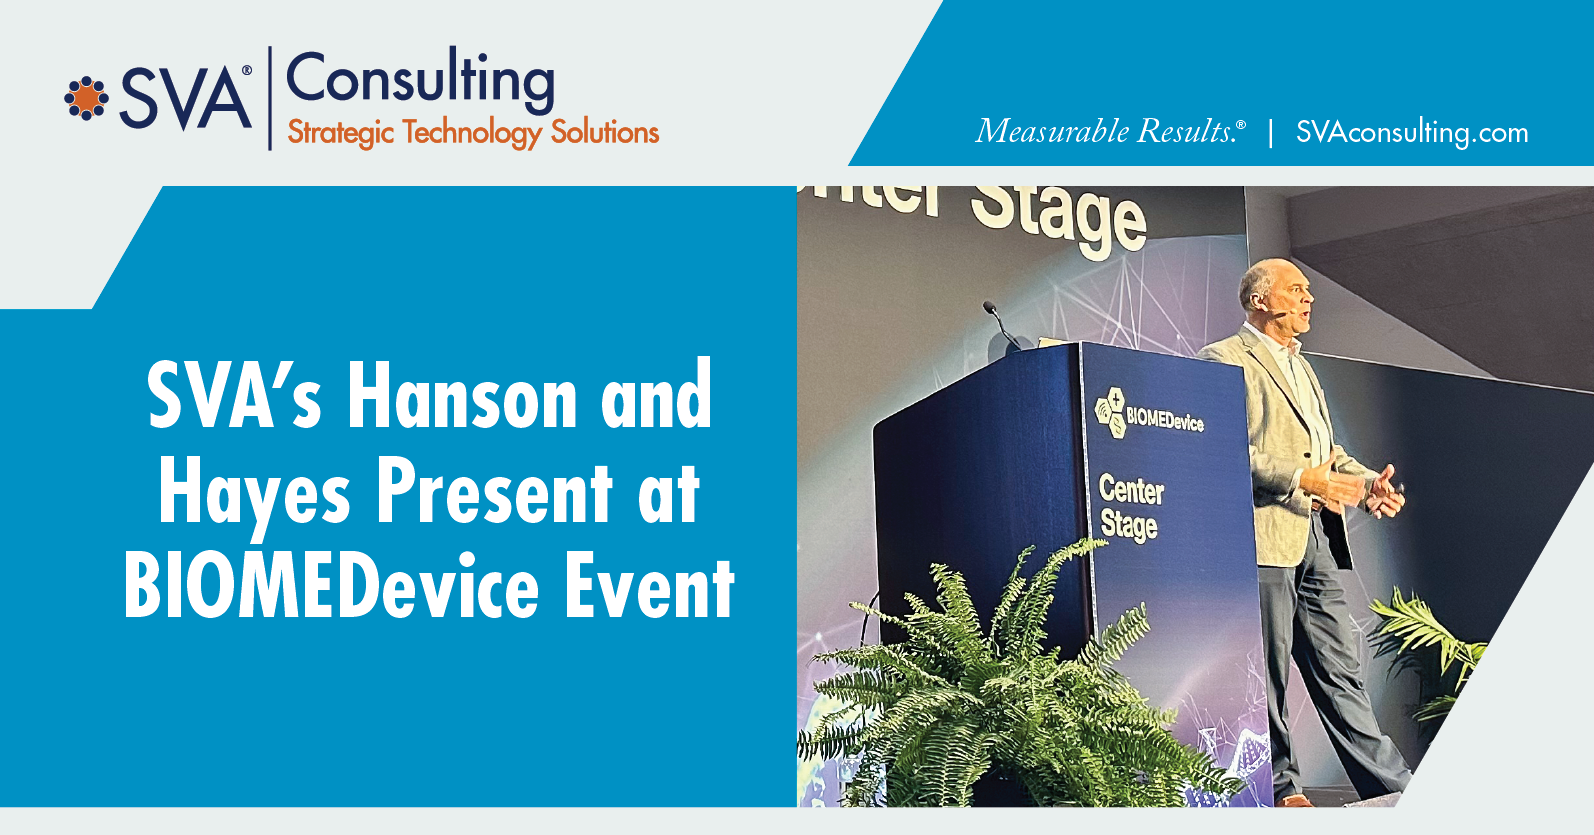 svas-hanson-and-hayes-present-at-biomedevice-event